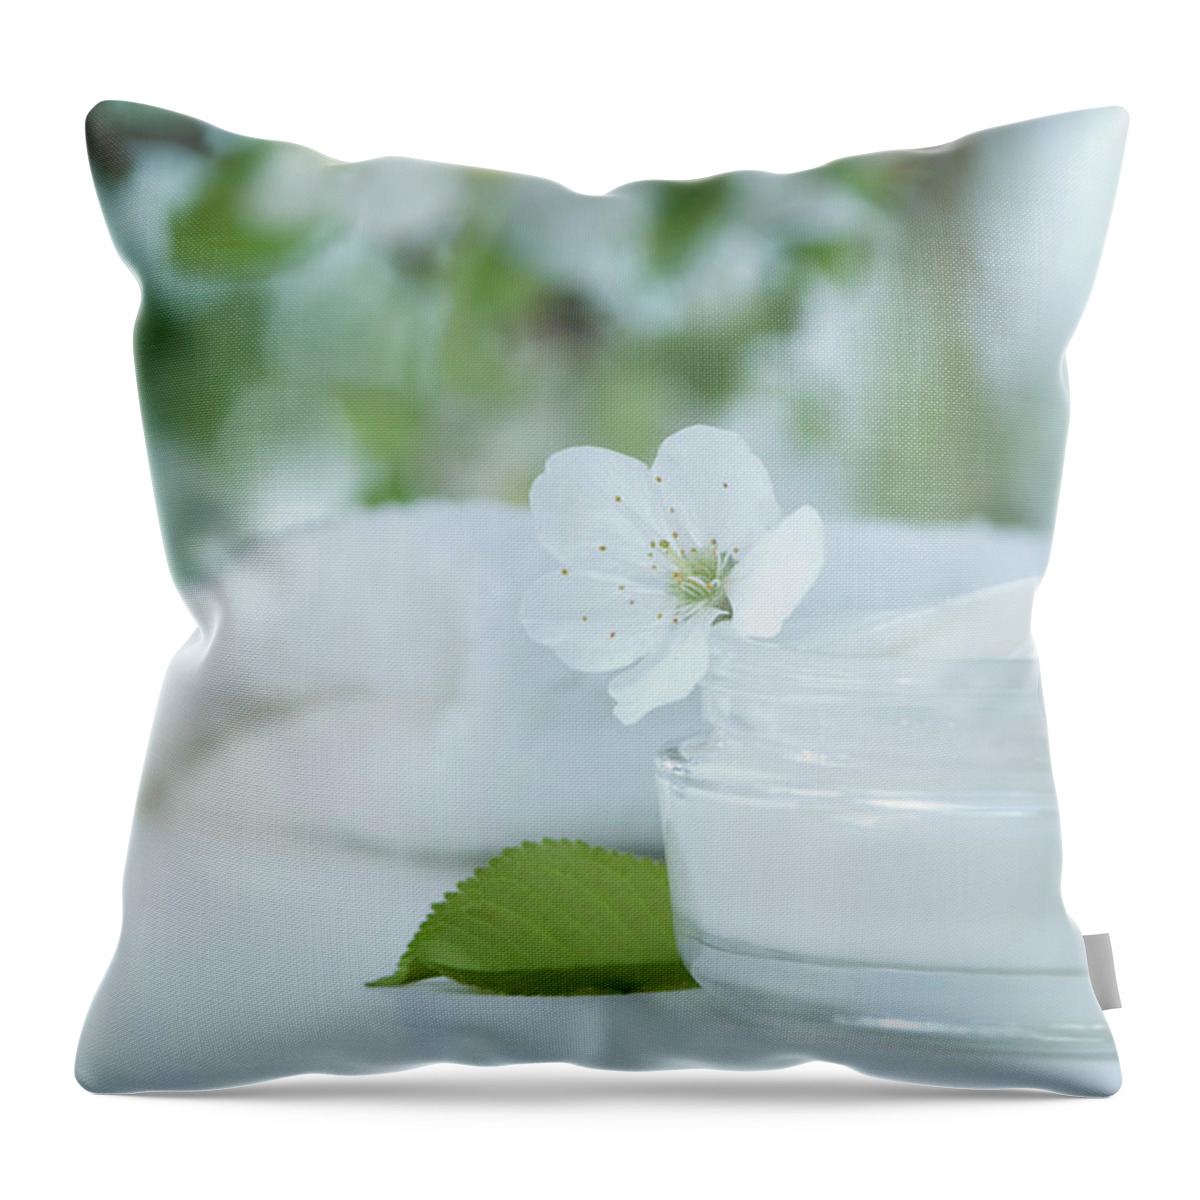 Spa Throw Pillow featuring the photograph Skin Cream With Cherry Blossom, Bath by Westend61